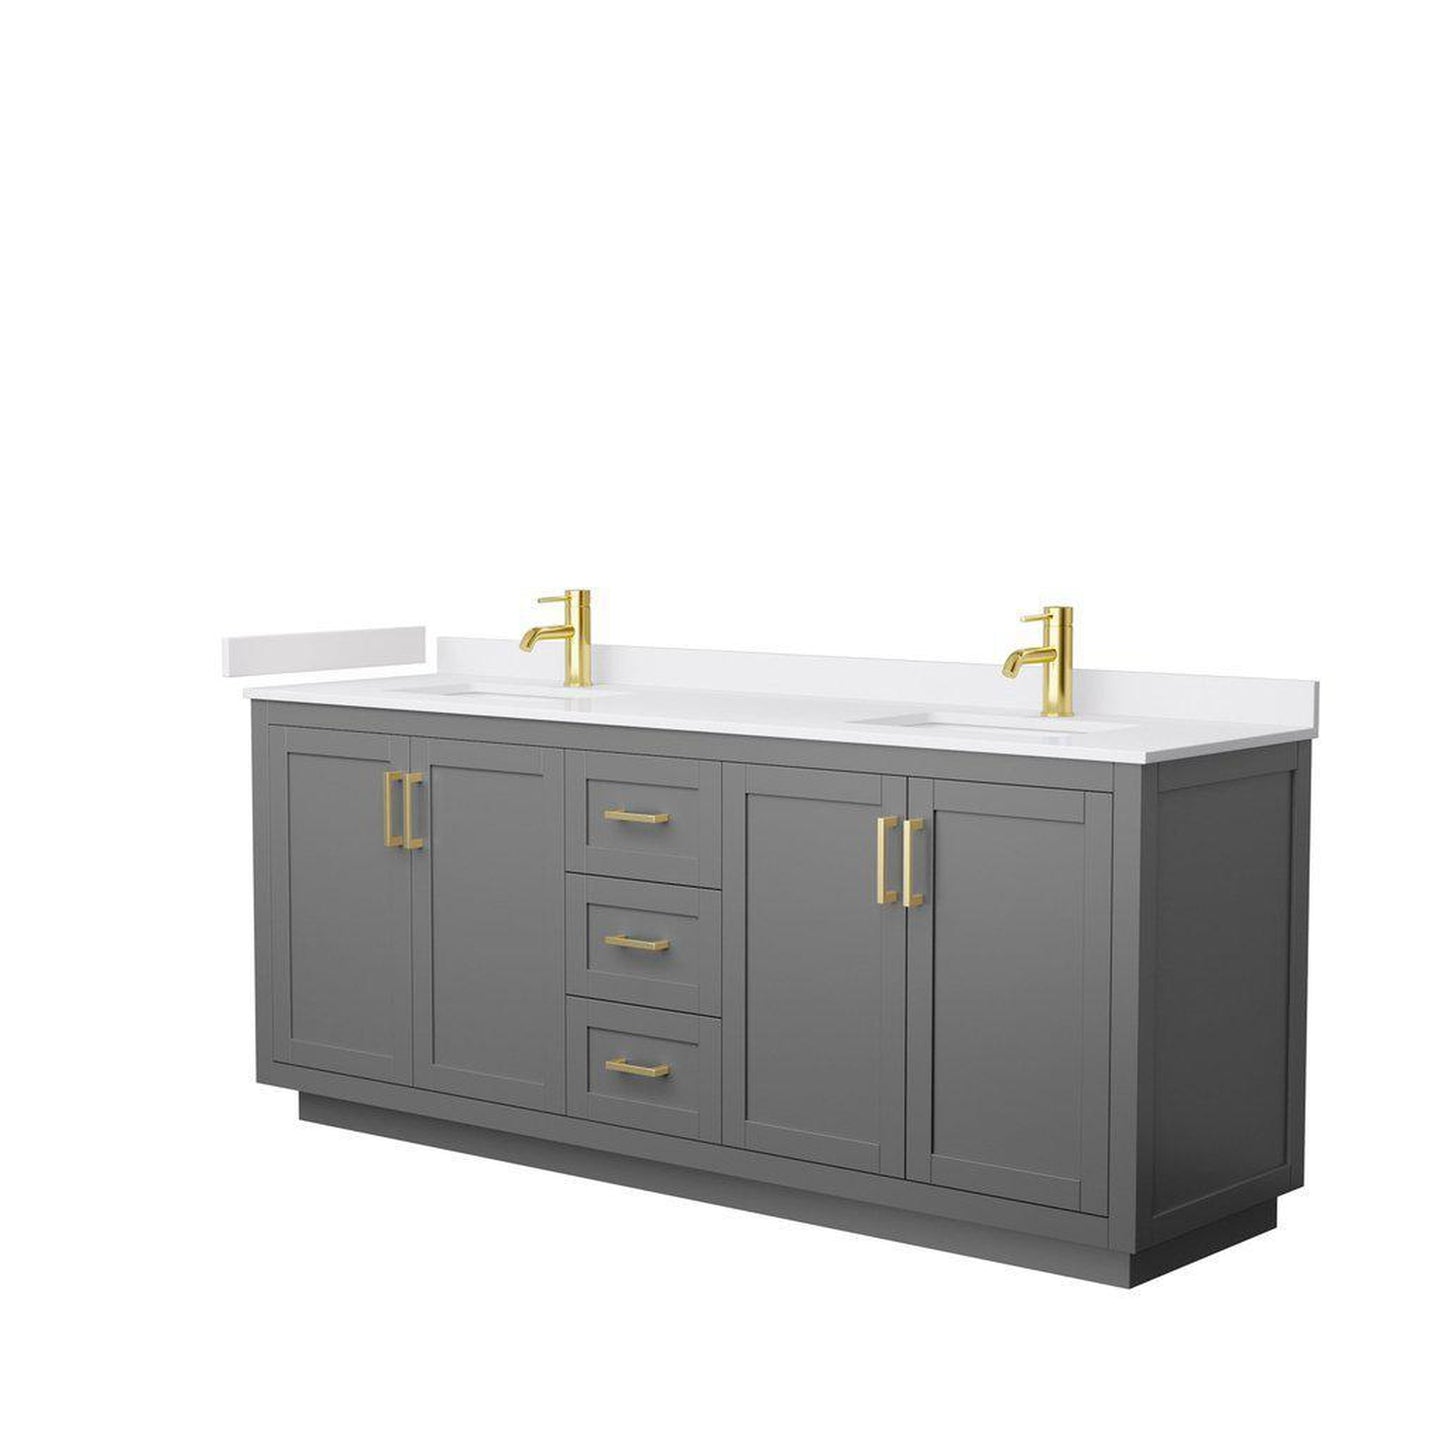 Wyndham Collection Miranda 80" Double Bathroom Dark Gray Vanity Set With White Cultured Marble Countertop, Undermount Square Sink, And Brushed Gold Trim